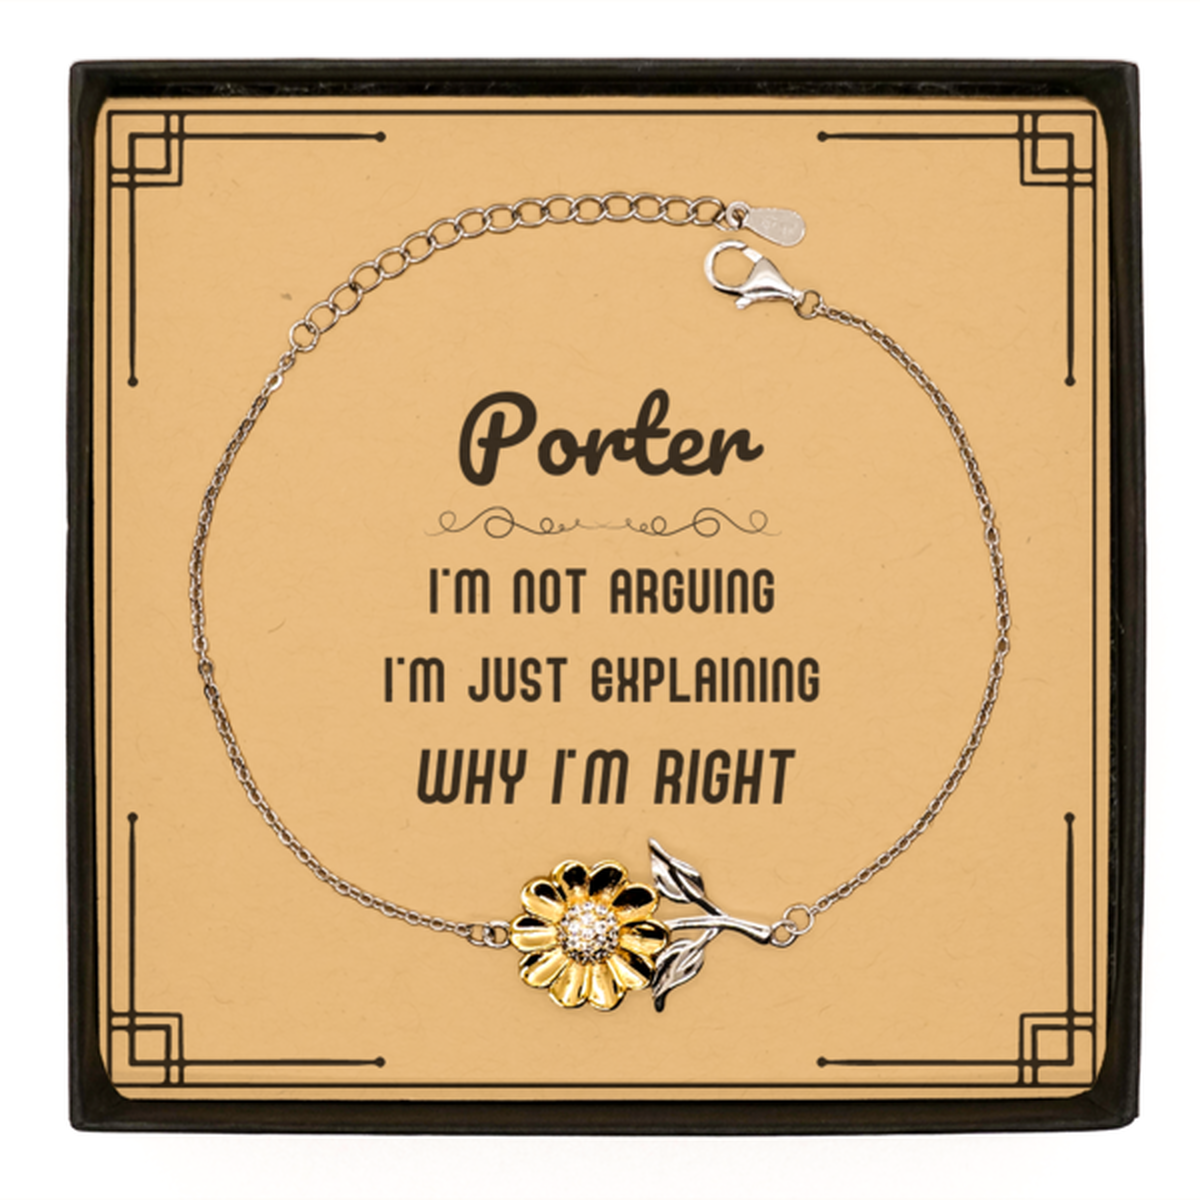 Porter I'm not Arguing. I'm Just Explaining Why I'm RIGHT Sunflower Bracelet, Funny Saying Quote Porter Gifts For Porter Message Card Graduation Birthday Christmas Gifts for Men Women Coworker